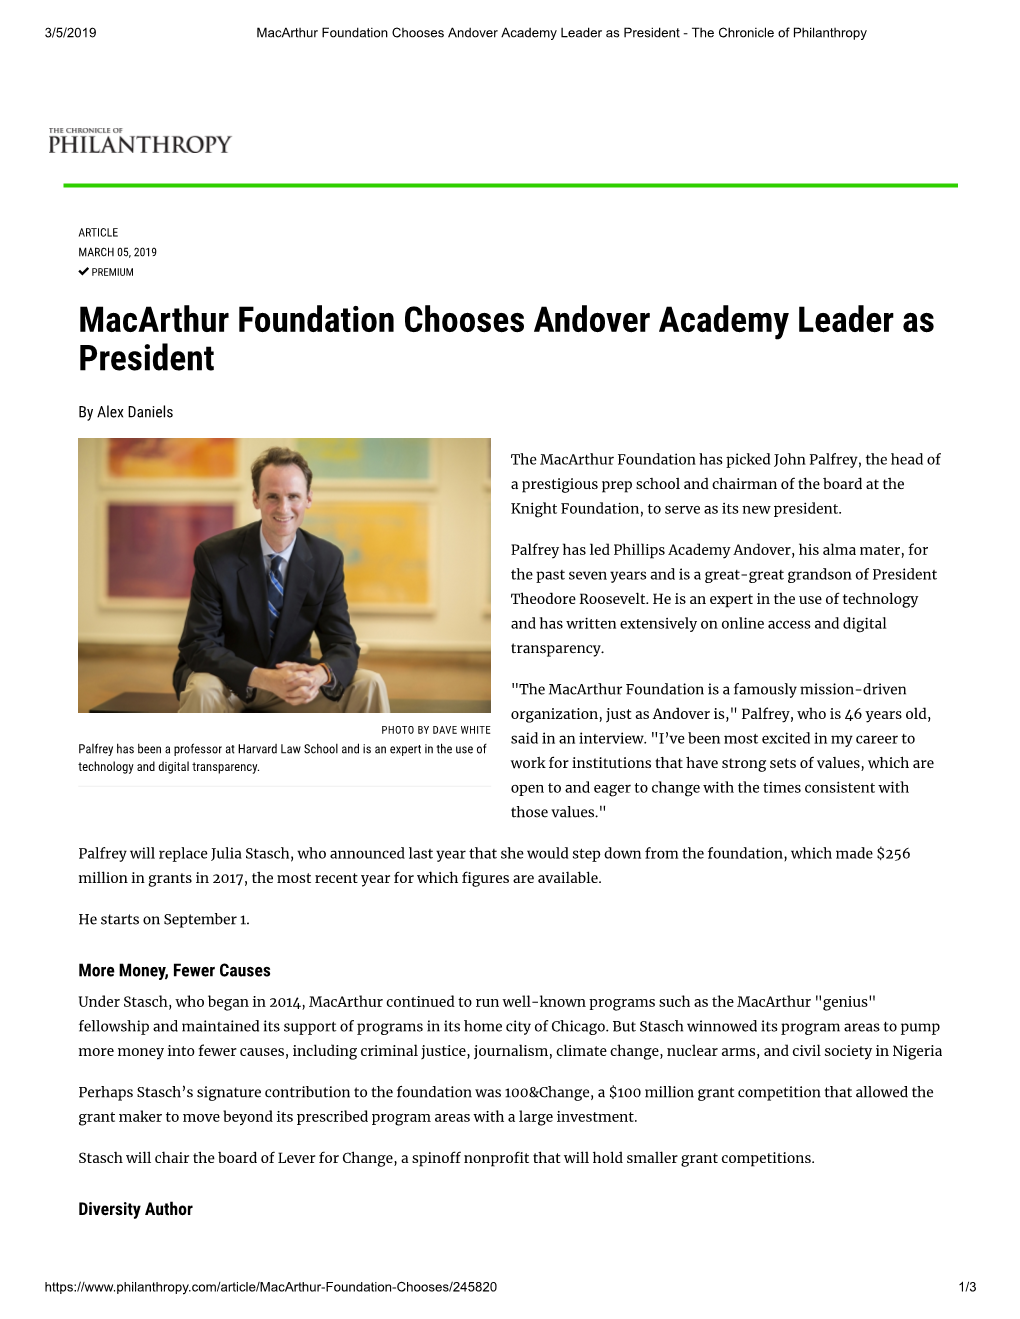 Macarthur Foundation Chooses Andover Academy Leader As President - the Chronicle of Philanthropy